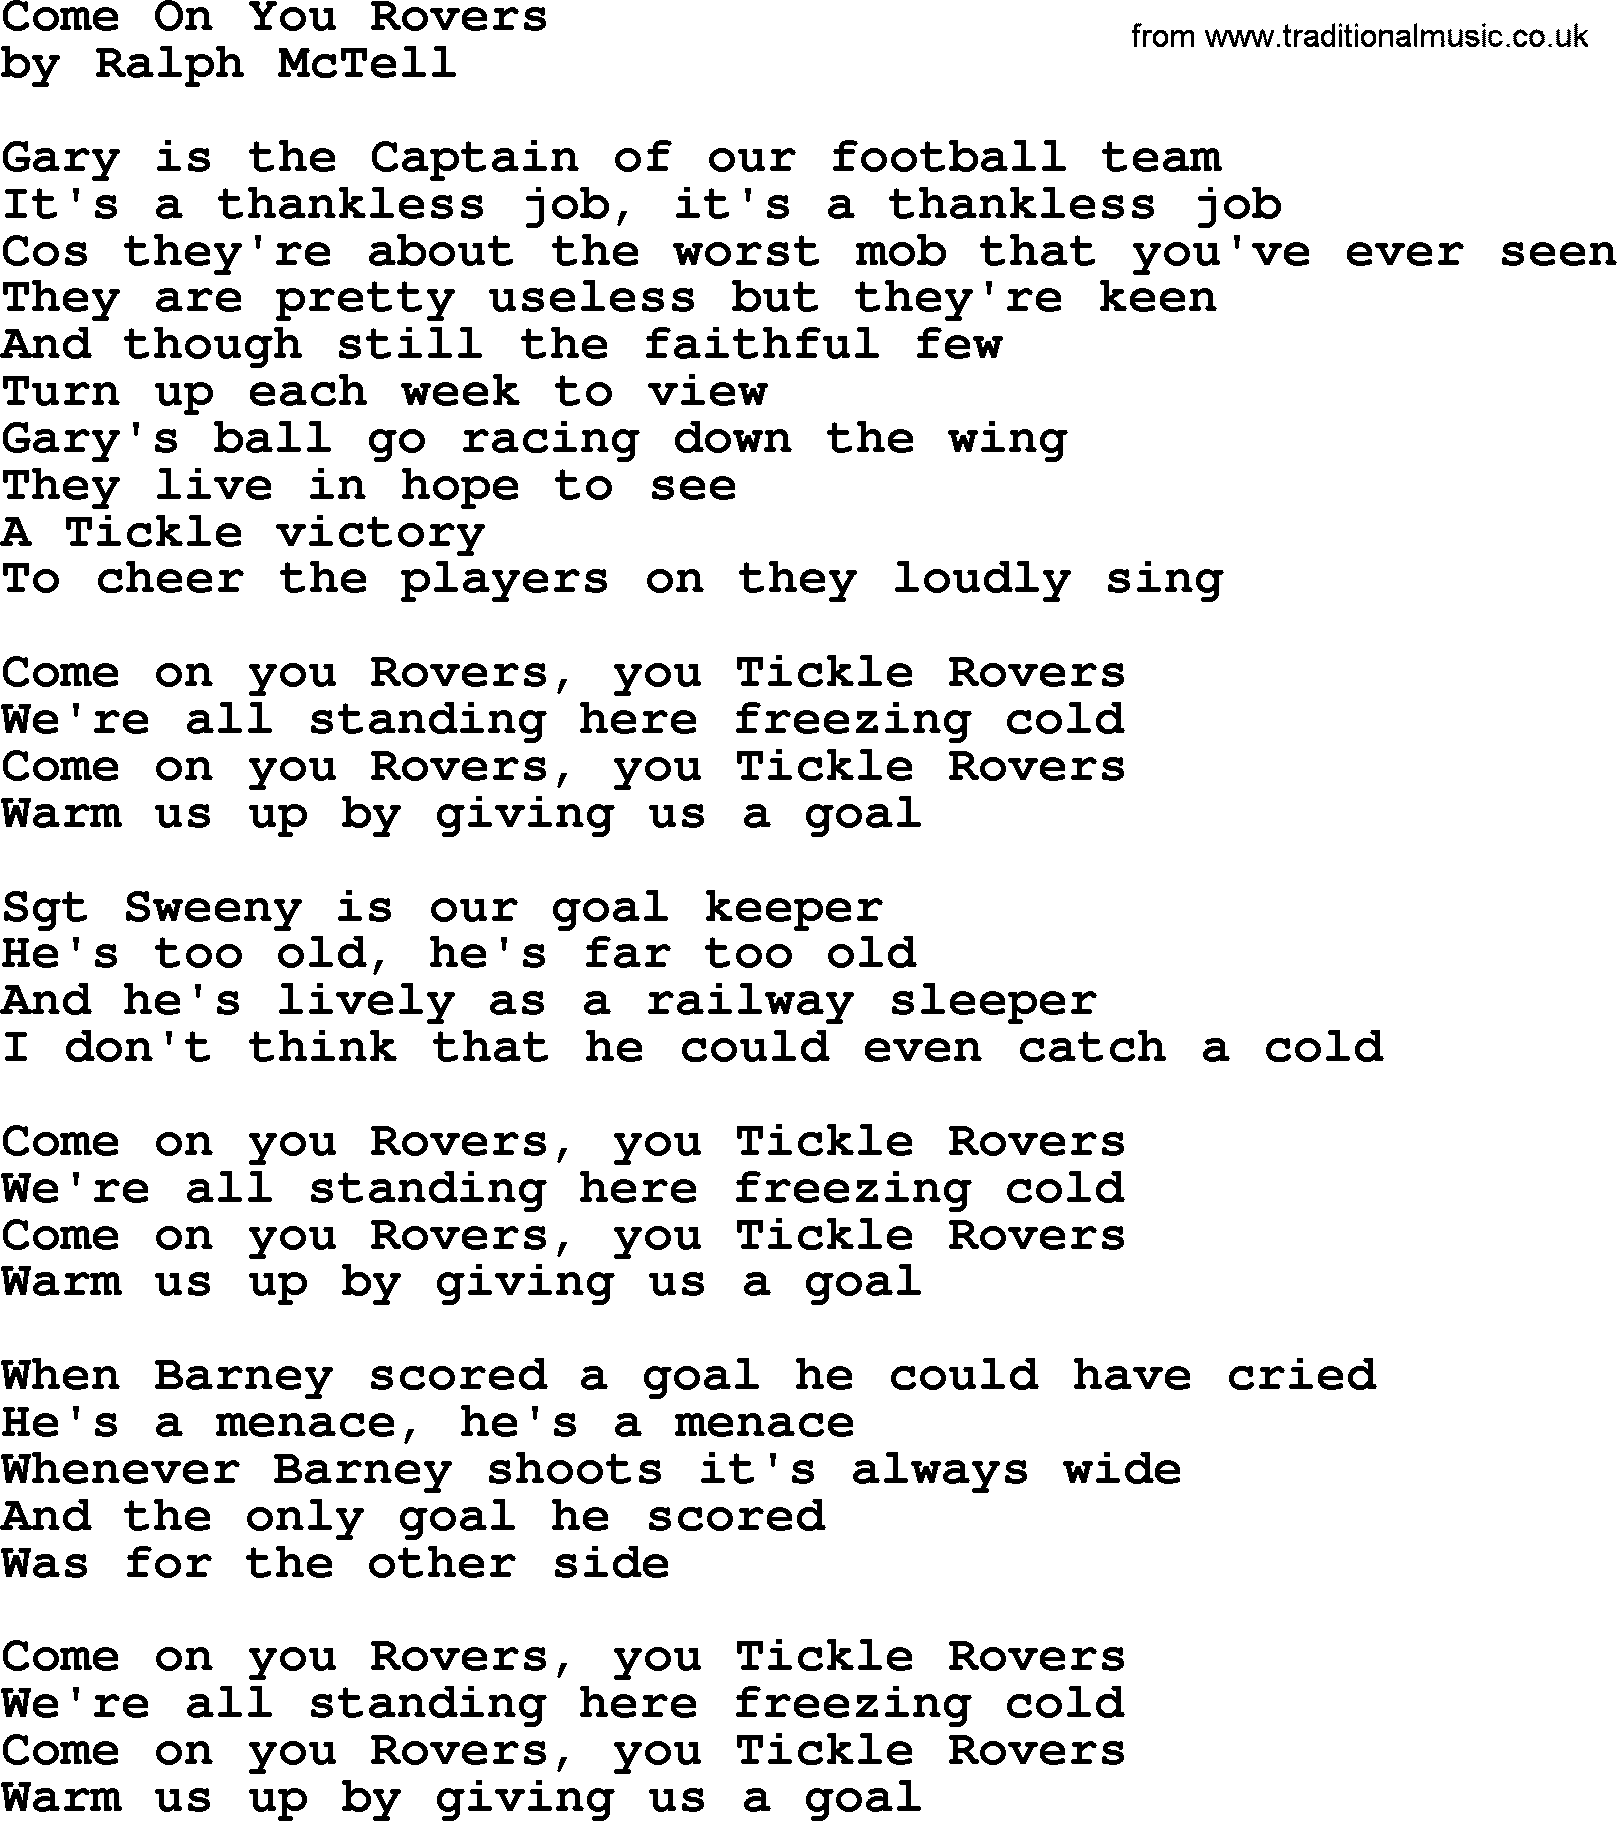 Ralph McTell Song: Come On You Rovers, lyrics